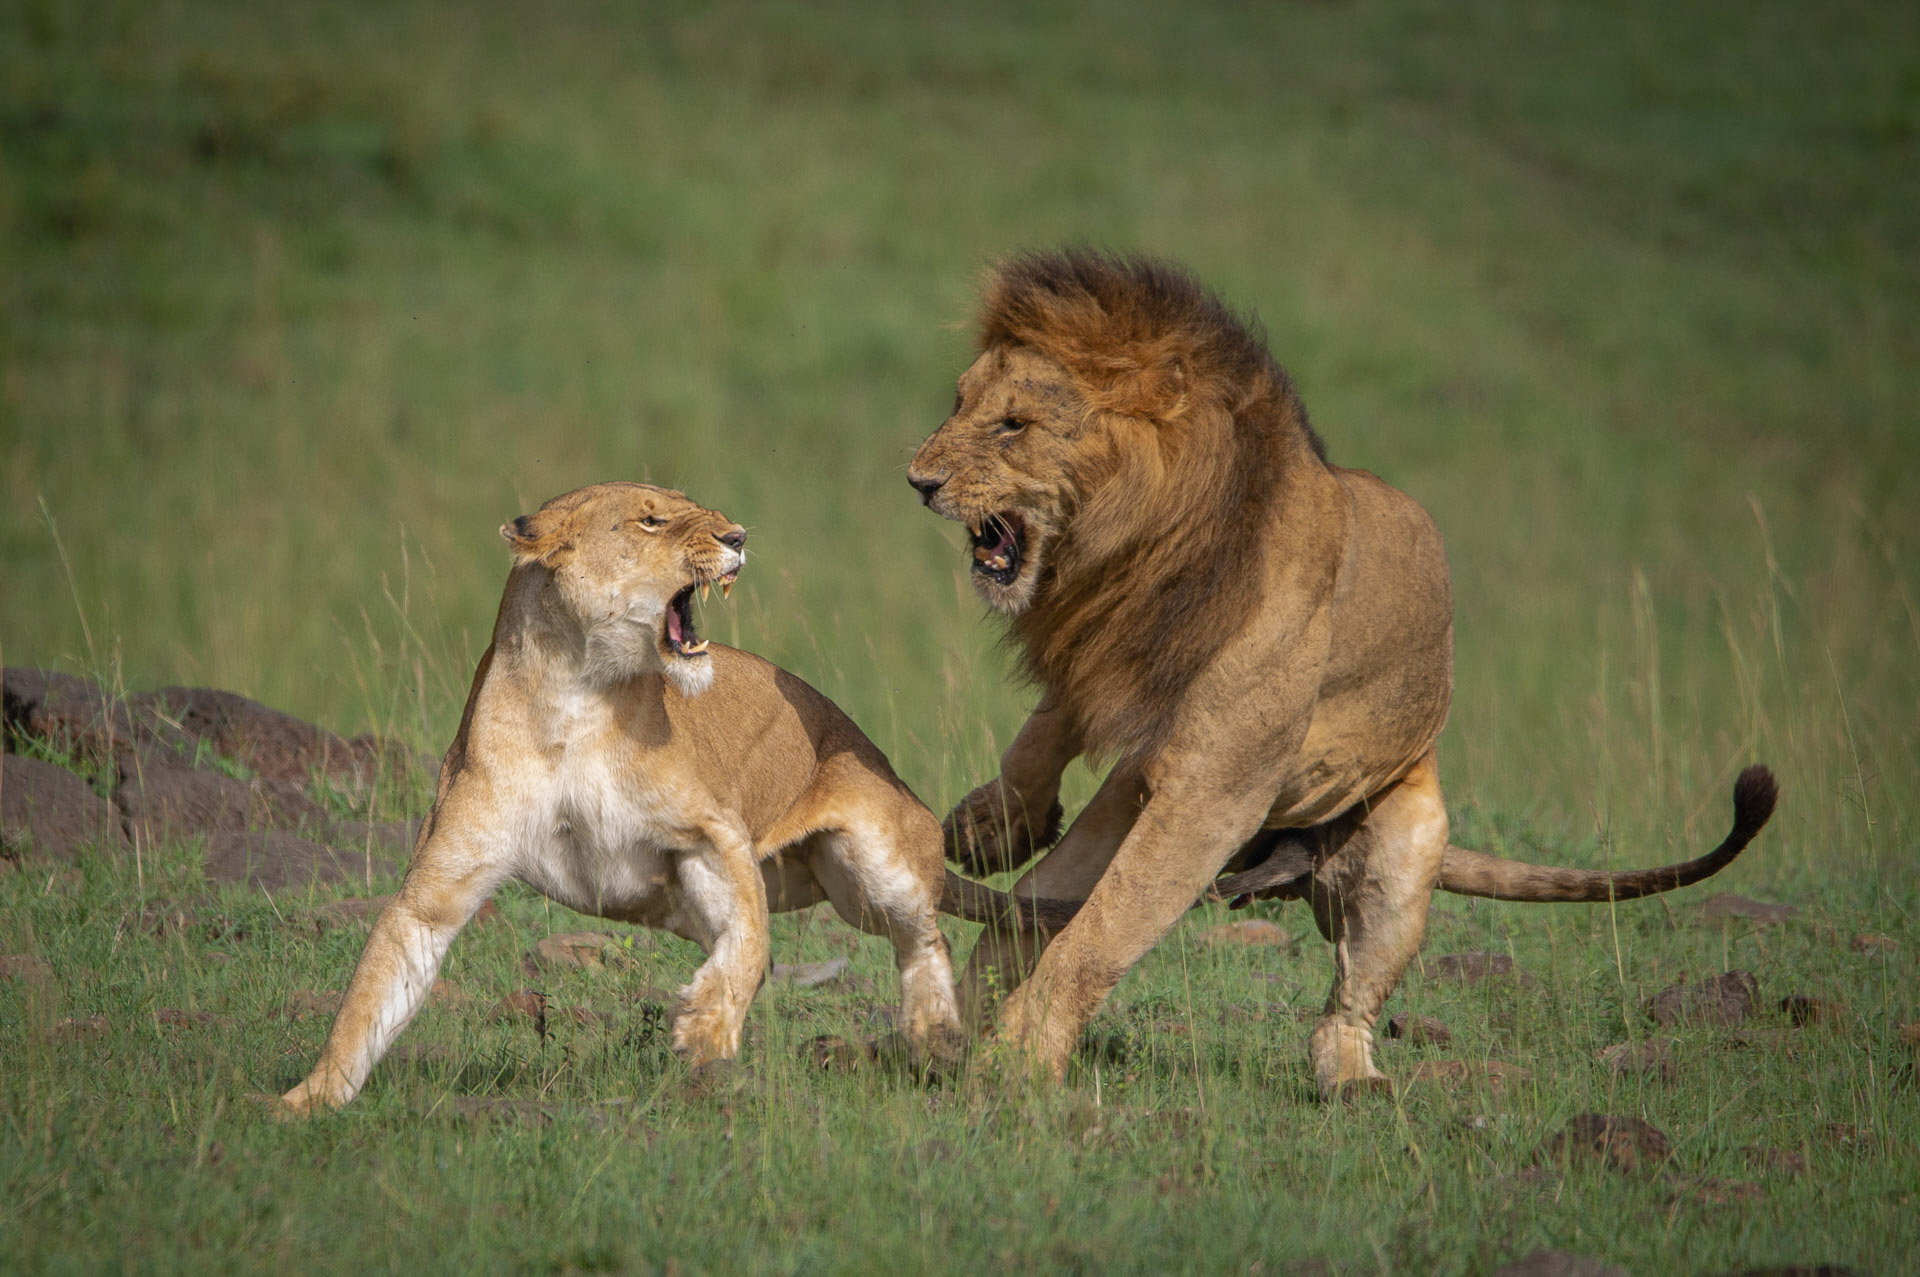 Or the complicated male-female lion dynamics